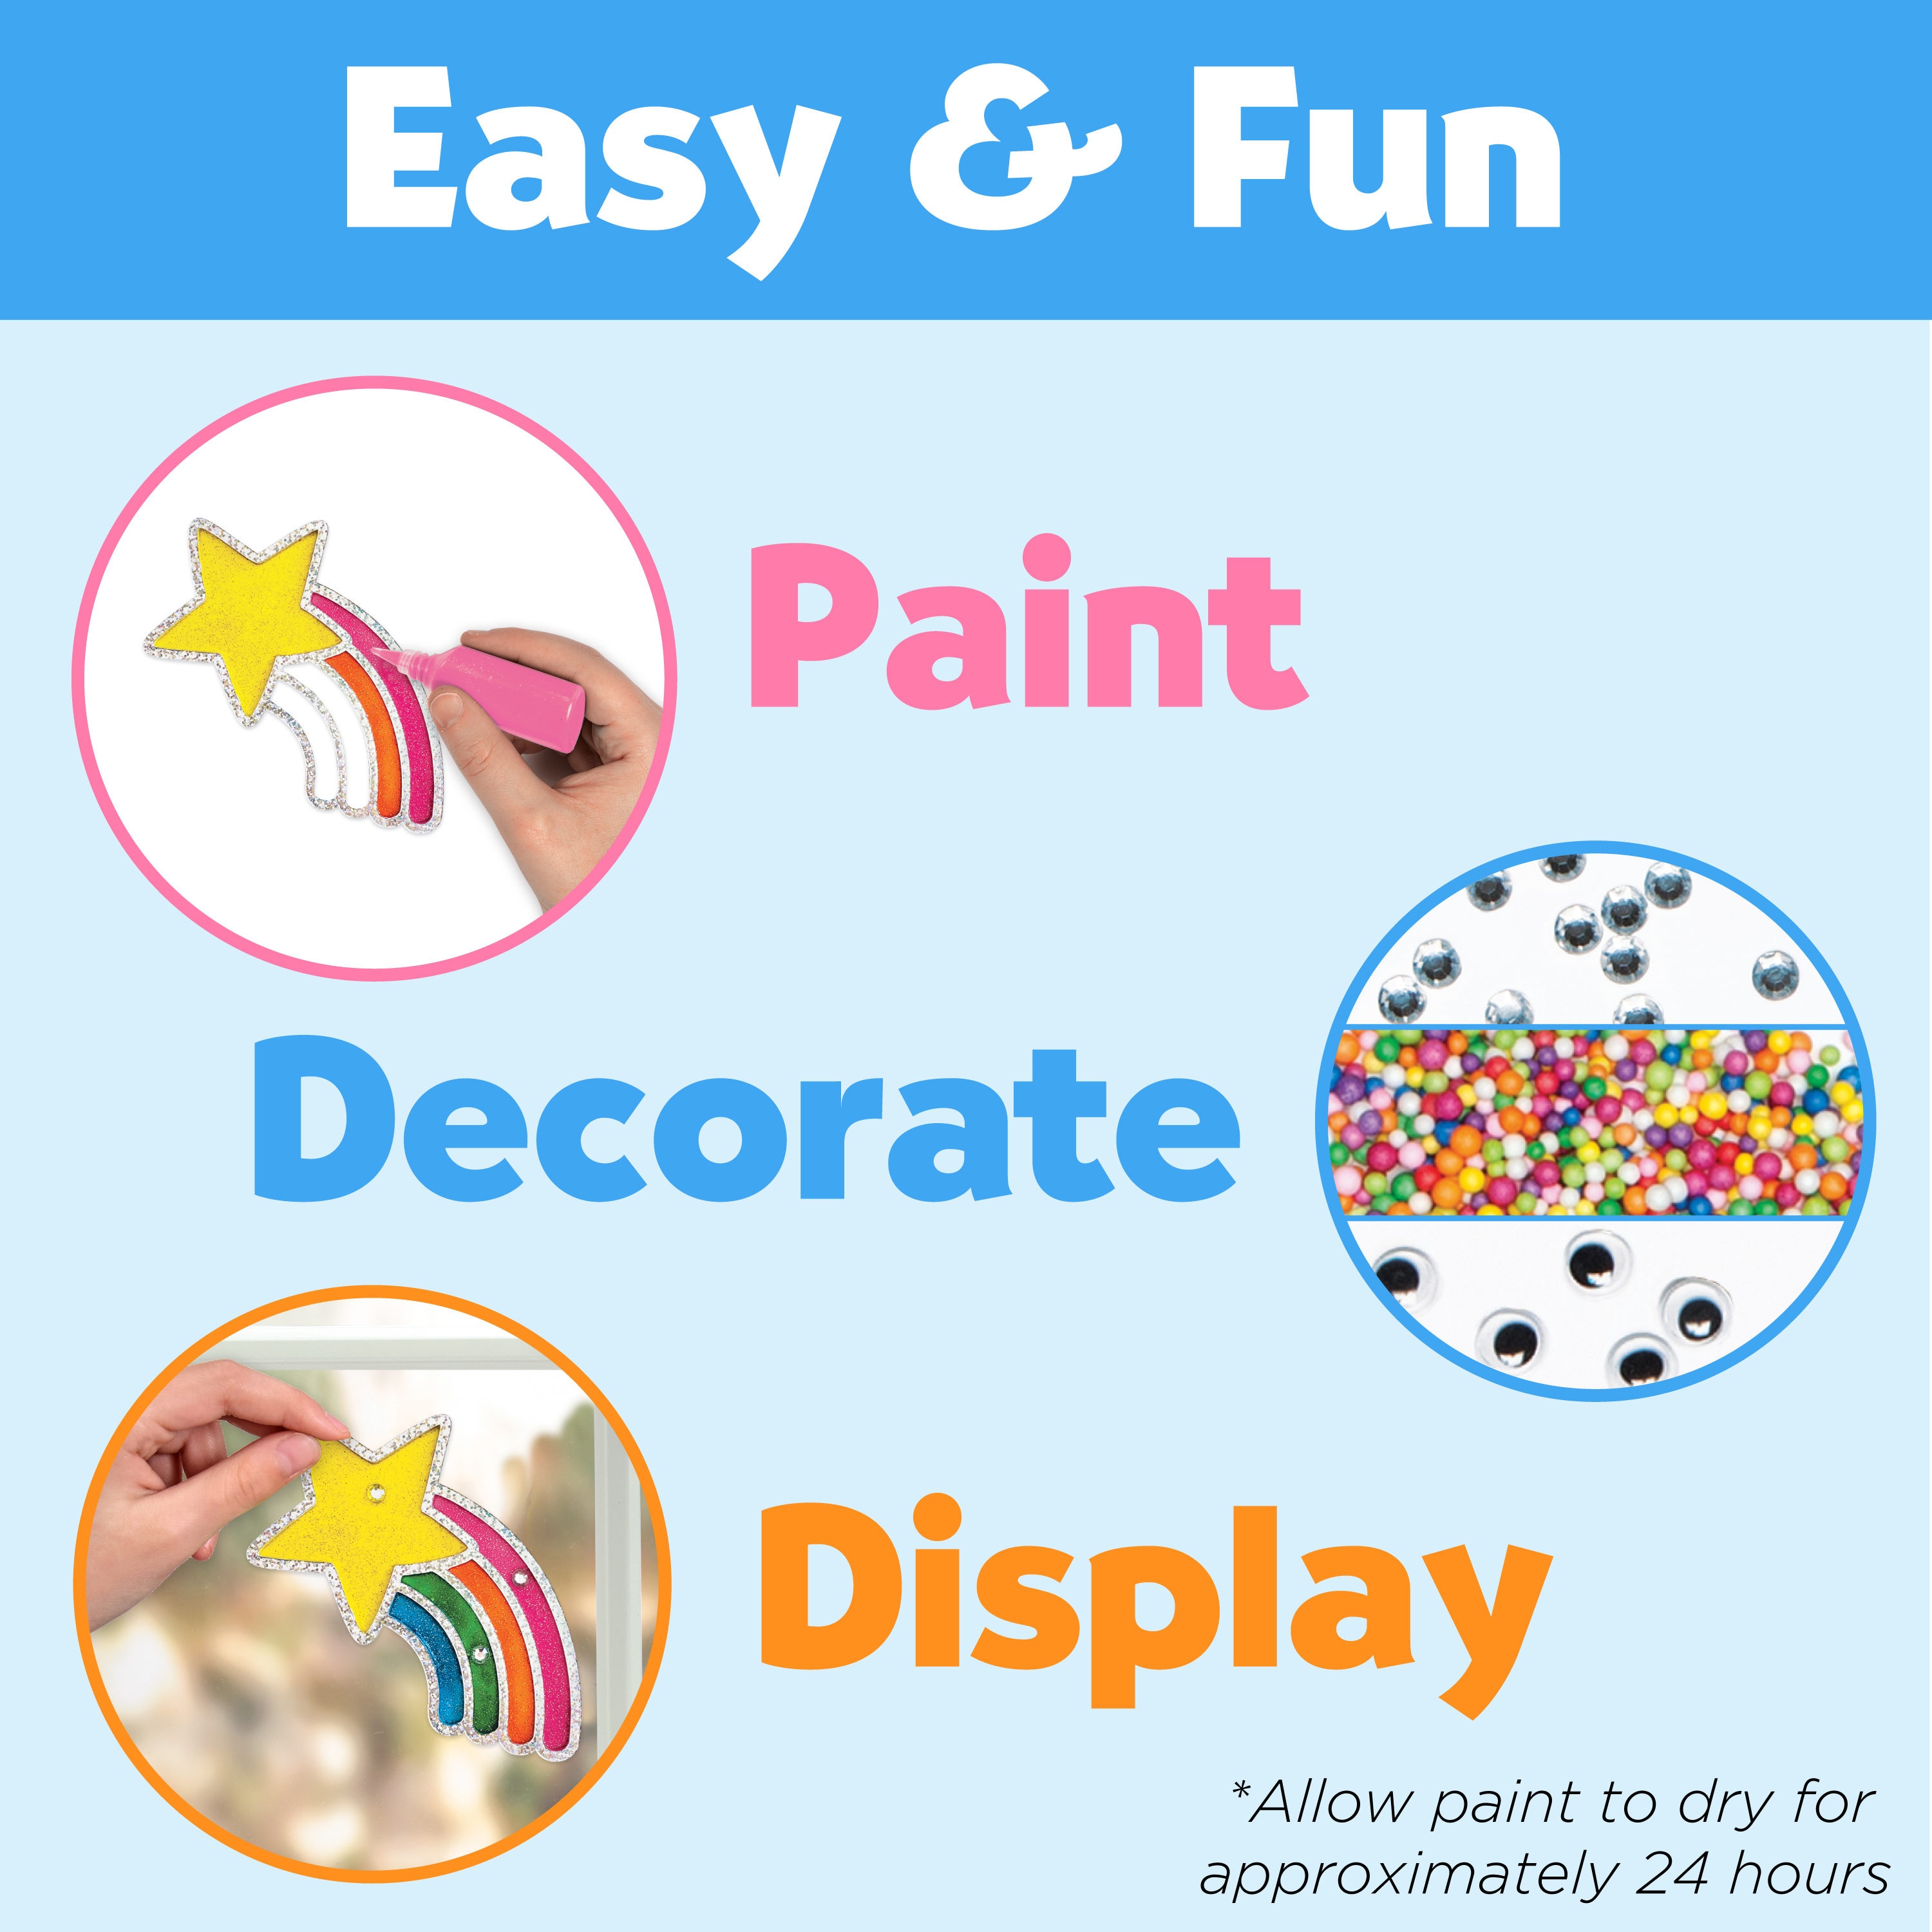 Faber-Castell creativity for kids window art fun fruits - paint and  decorate 2 suncatchers, create your